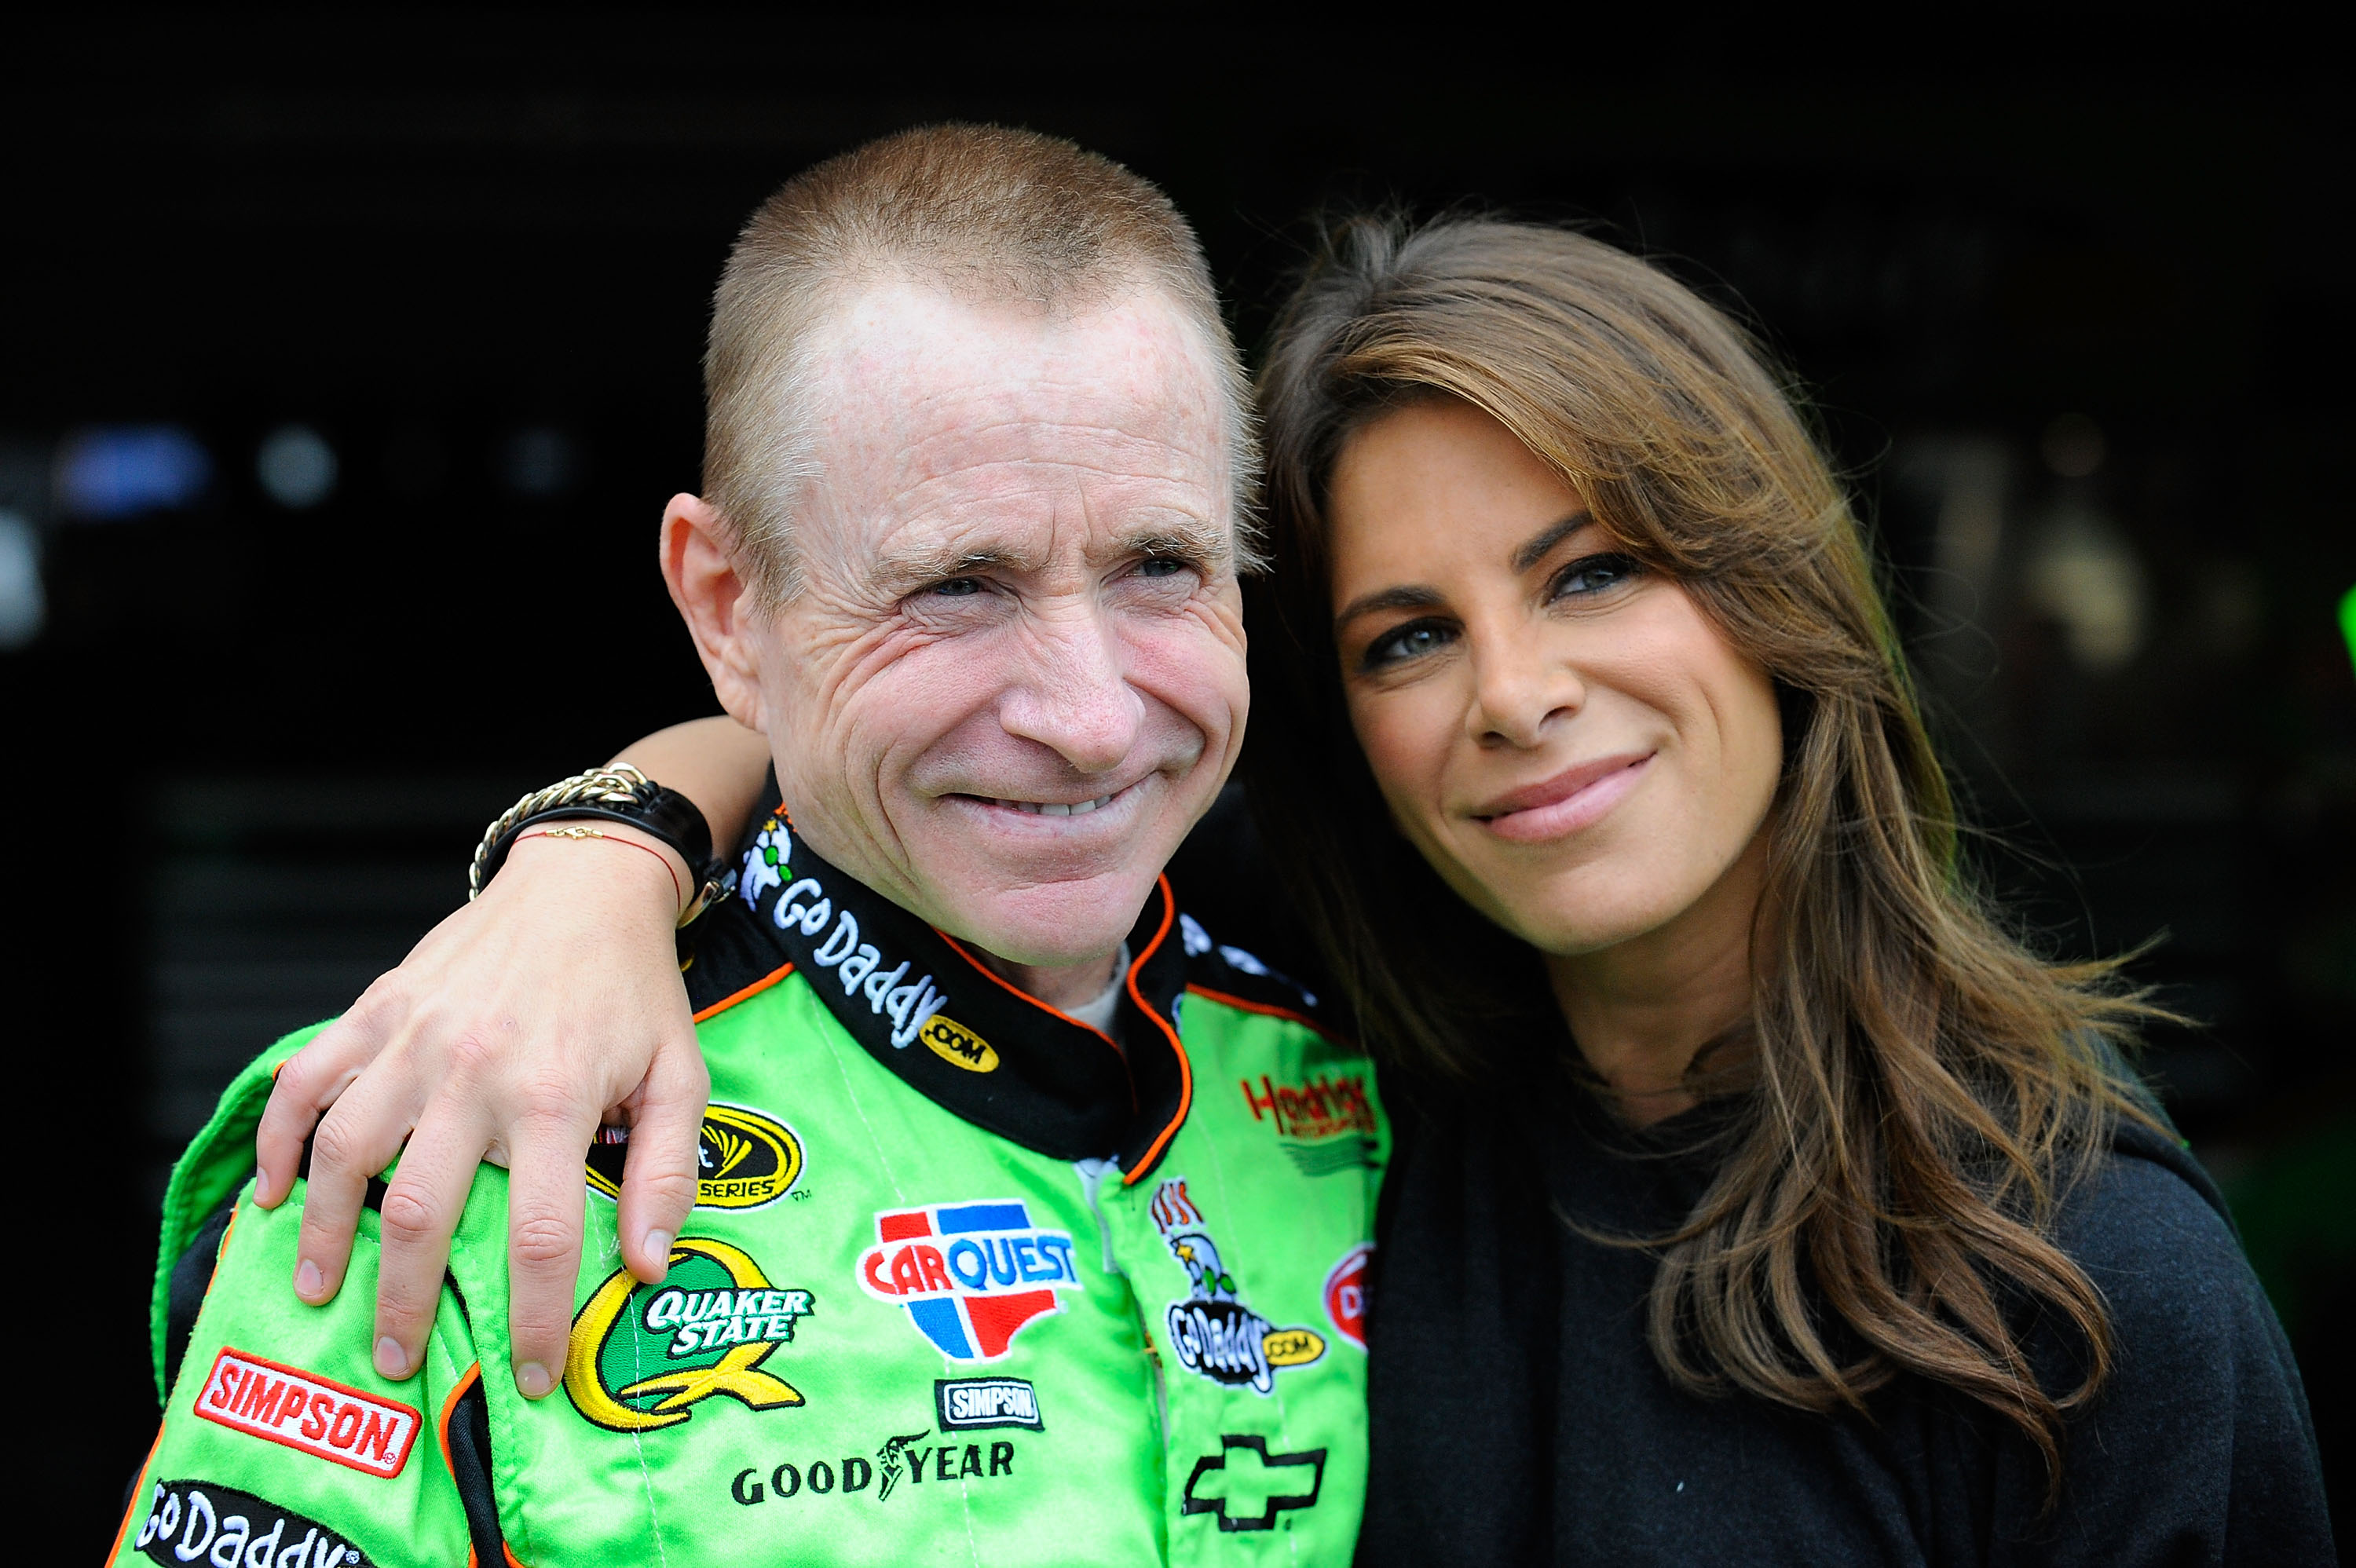 FONTANA, CA - MARCH 25:  Mark Martin, driver of the #5 GoDaddy.com Chevrolet, poses with celebrity fitness trainer Jillian Michaels prior to practice for the NASCAR Sprint Cup Series Auto Club 400 at Auto Club Speedway on March 25, 2011 in Fontana, Califo